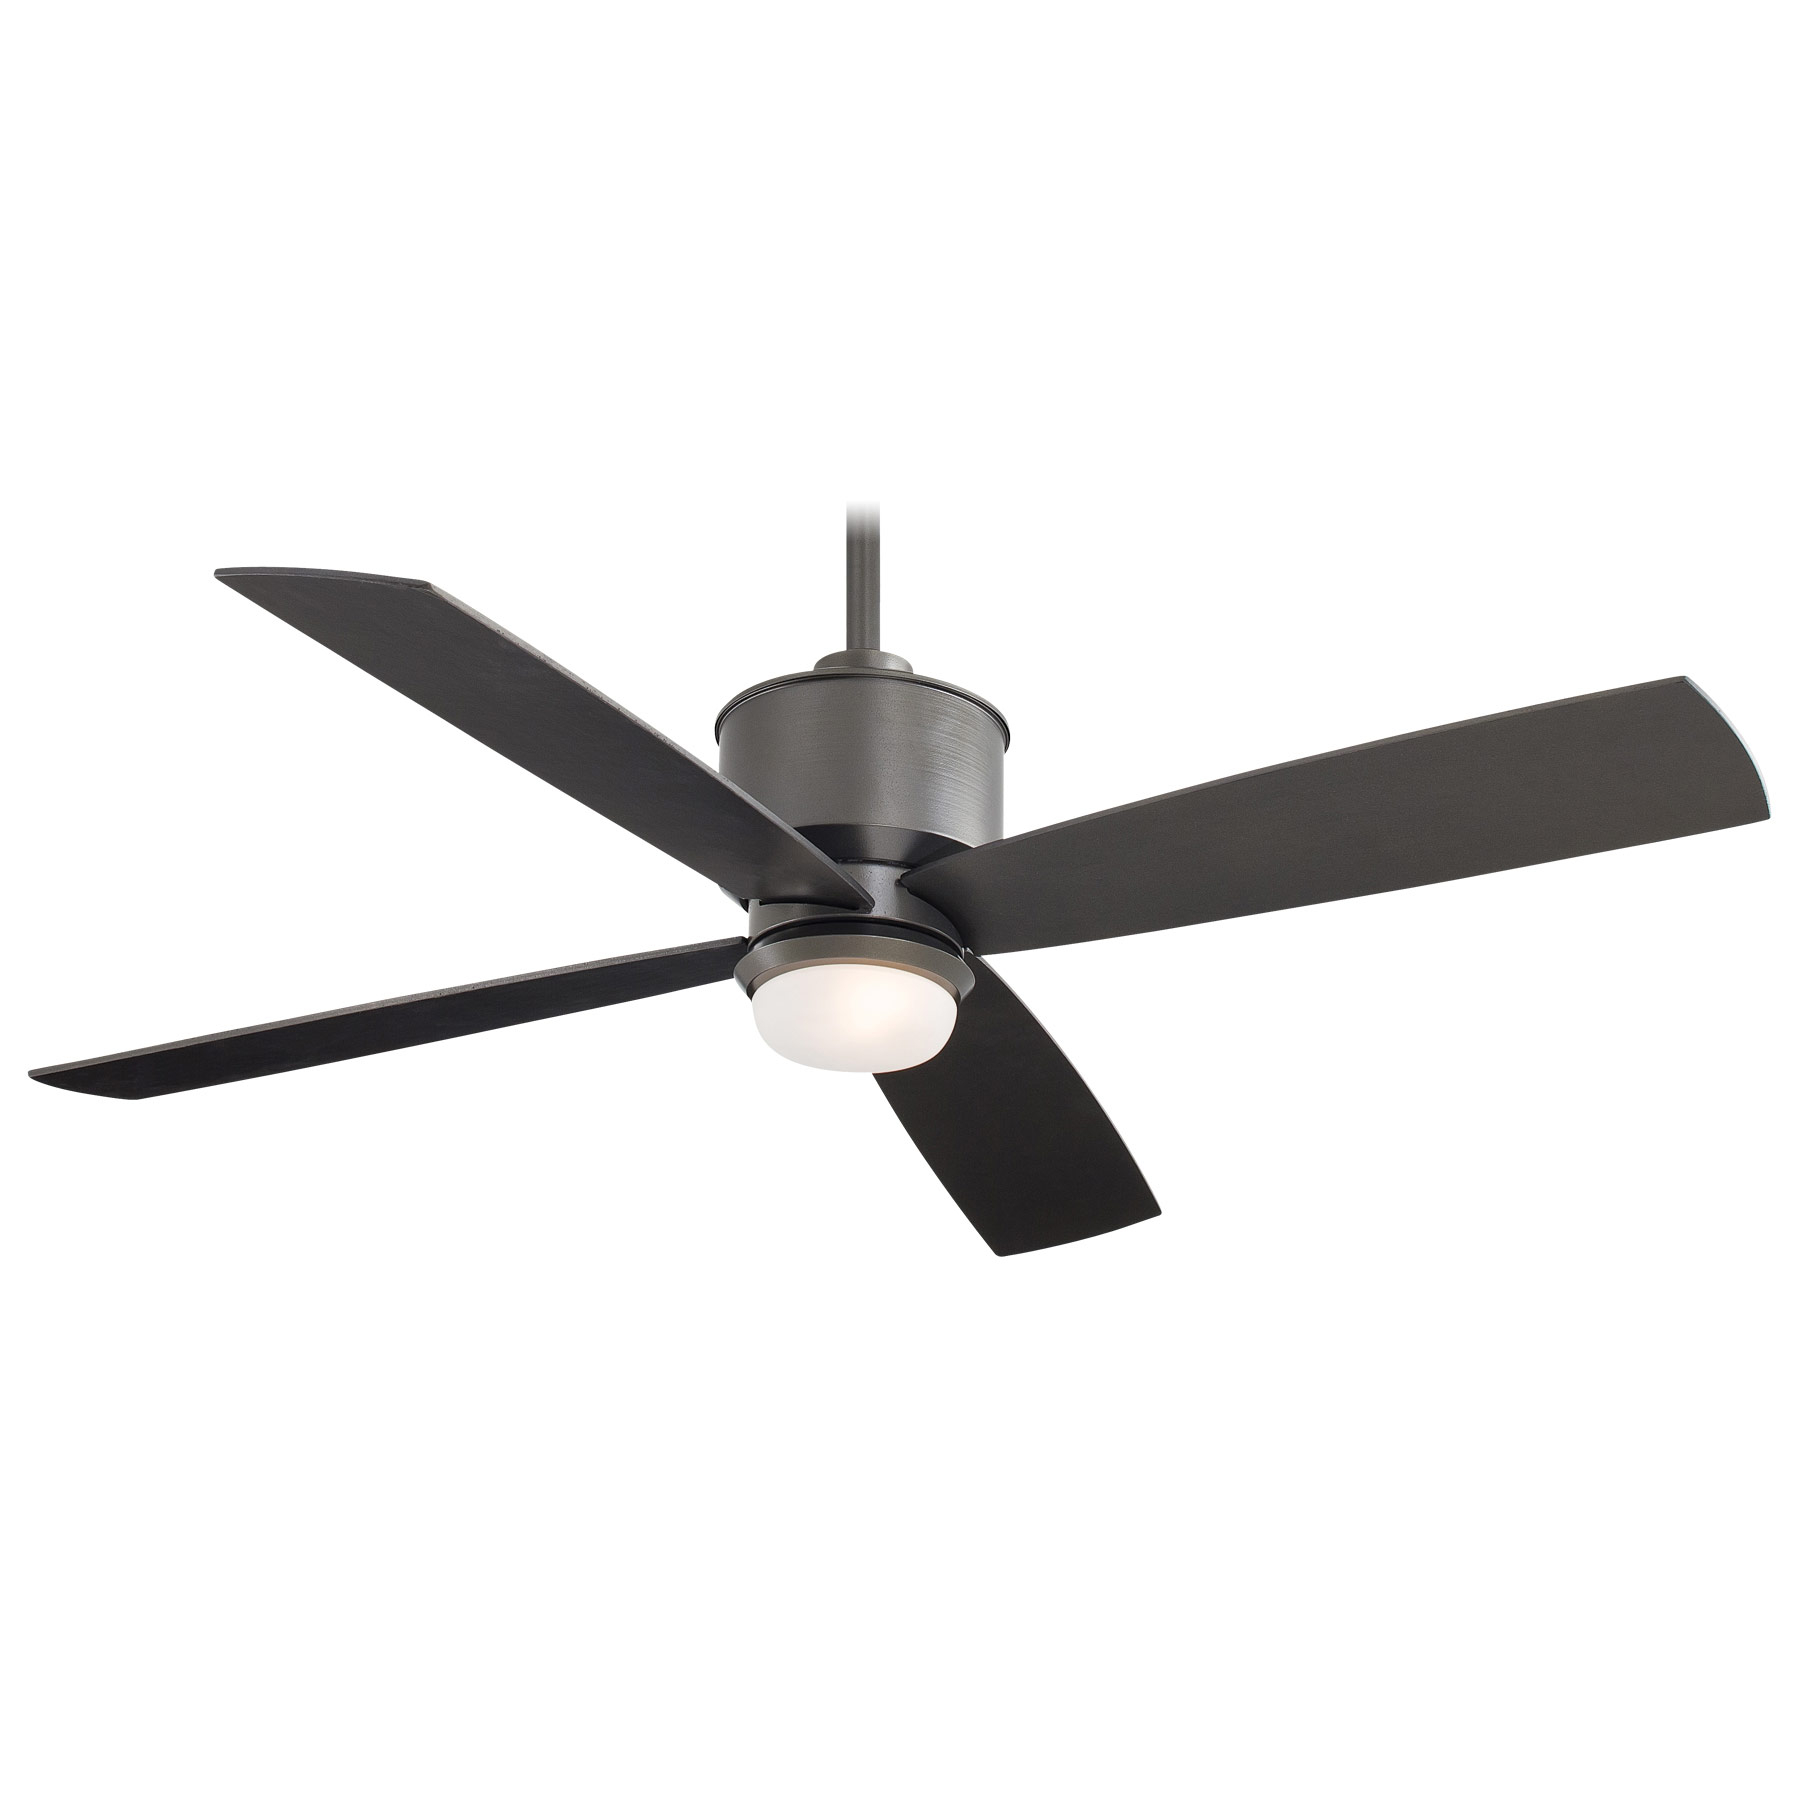 Strata Indoor Outdoor Ceiling Fan With Light Minka Aire F734 Si inside proportions 1800 X 1800